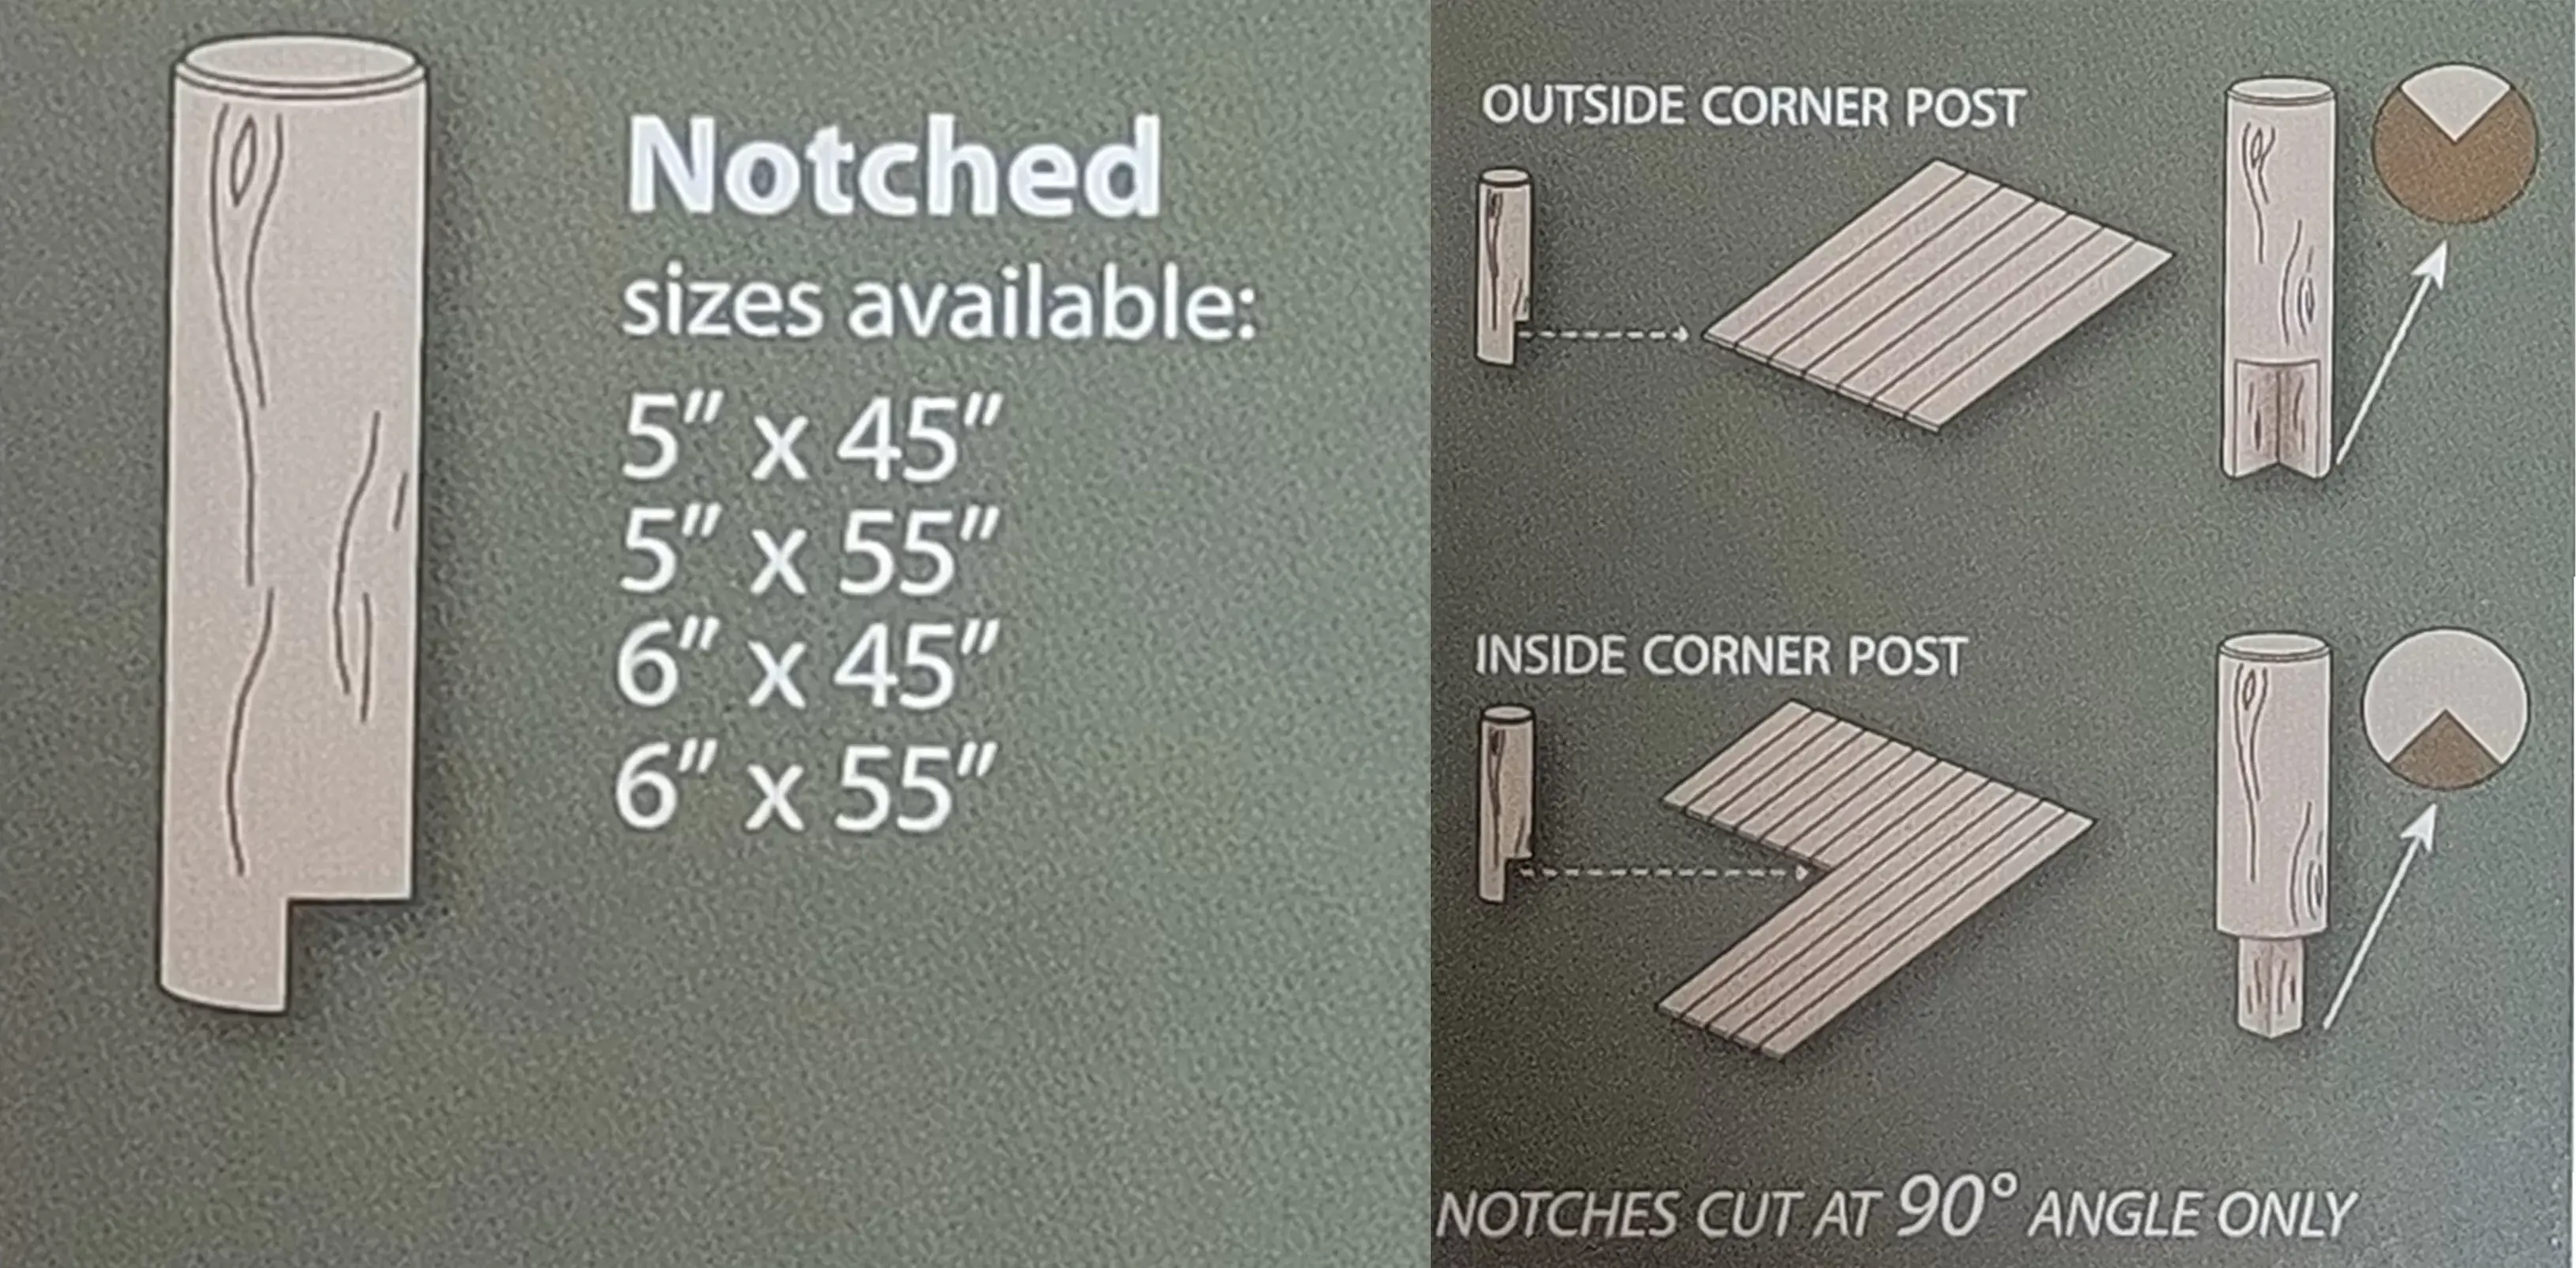 Additional visual examples of how inside and outside notches work on a deck or floor. Call for more information.